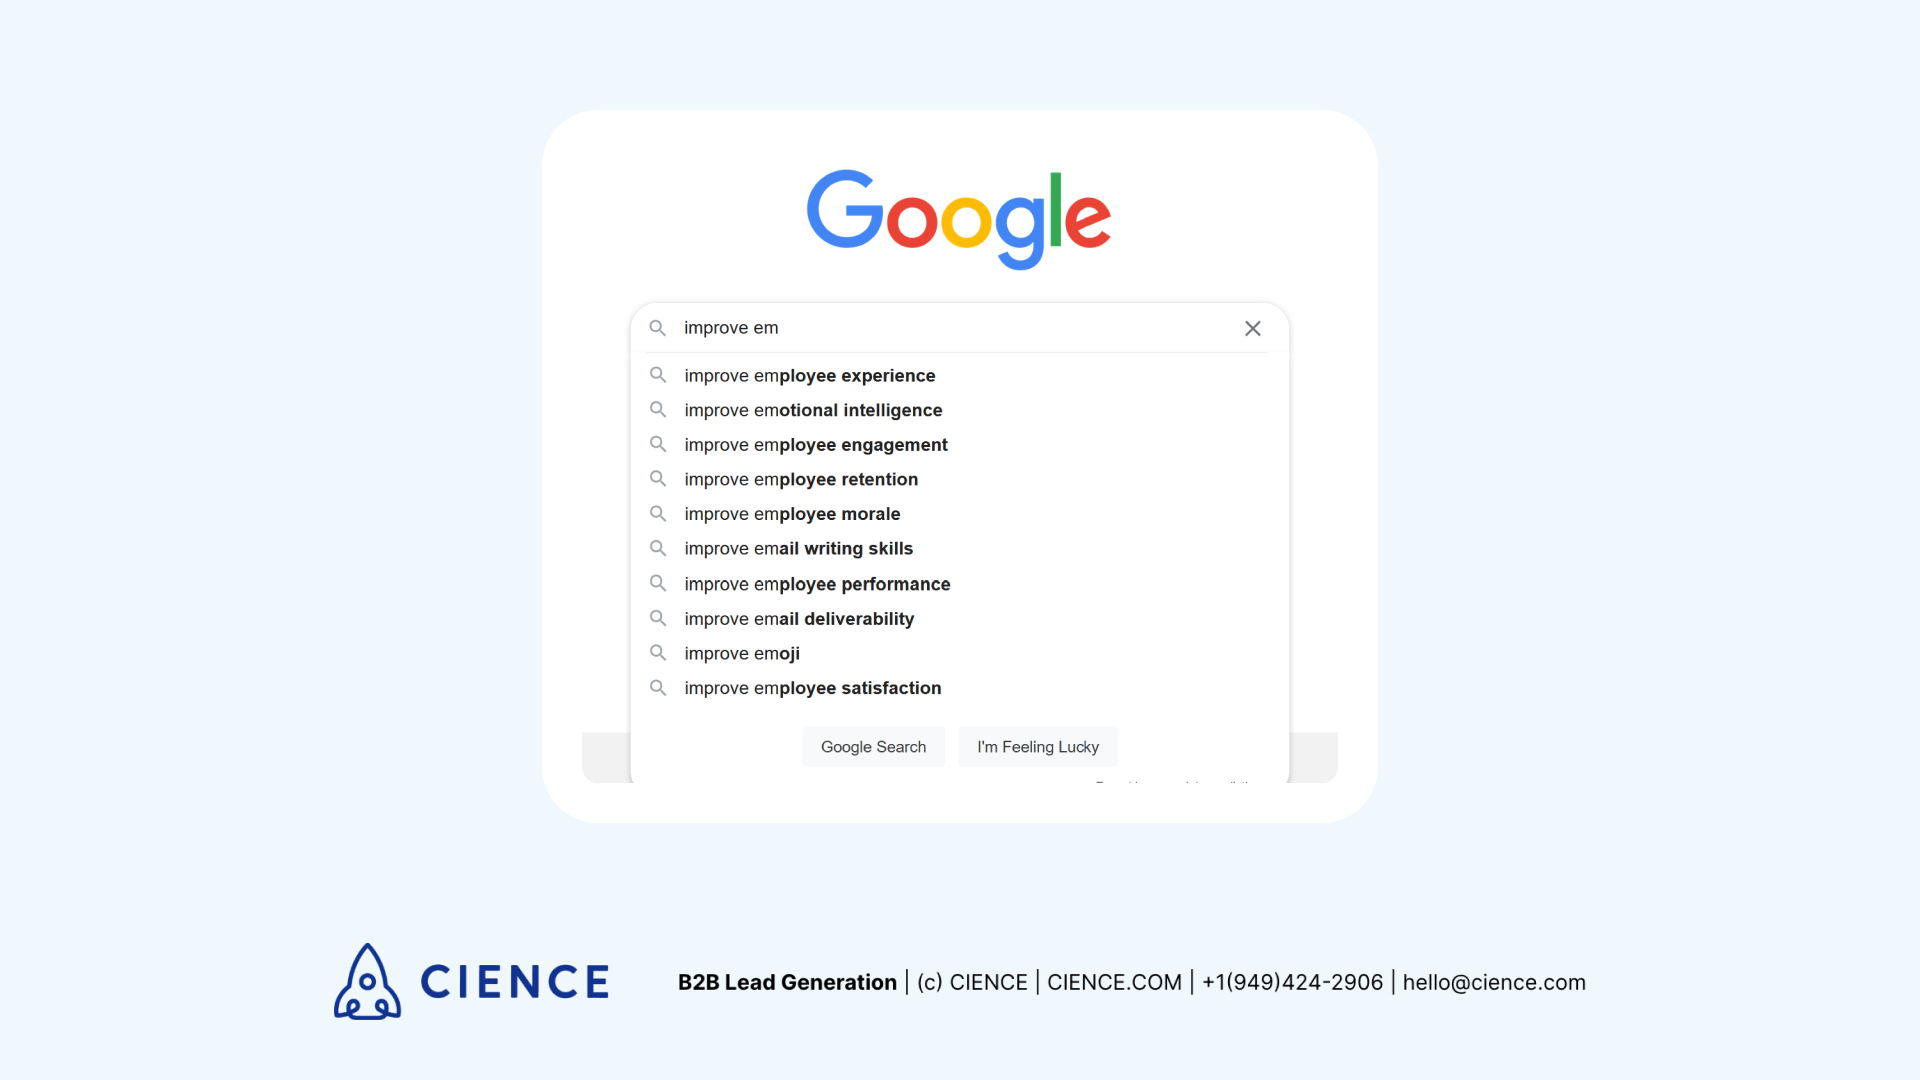 Using Google autofill suggestions for SEO keyword research